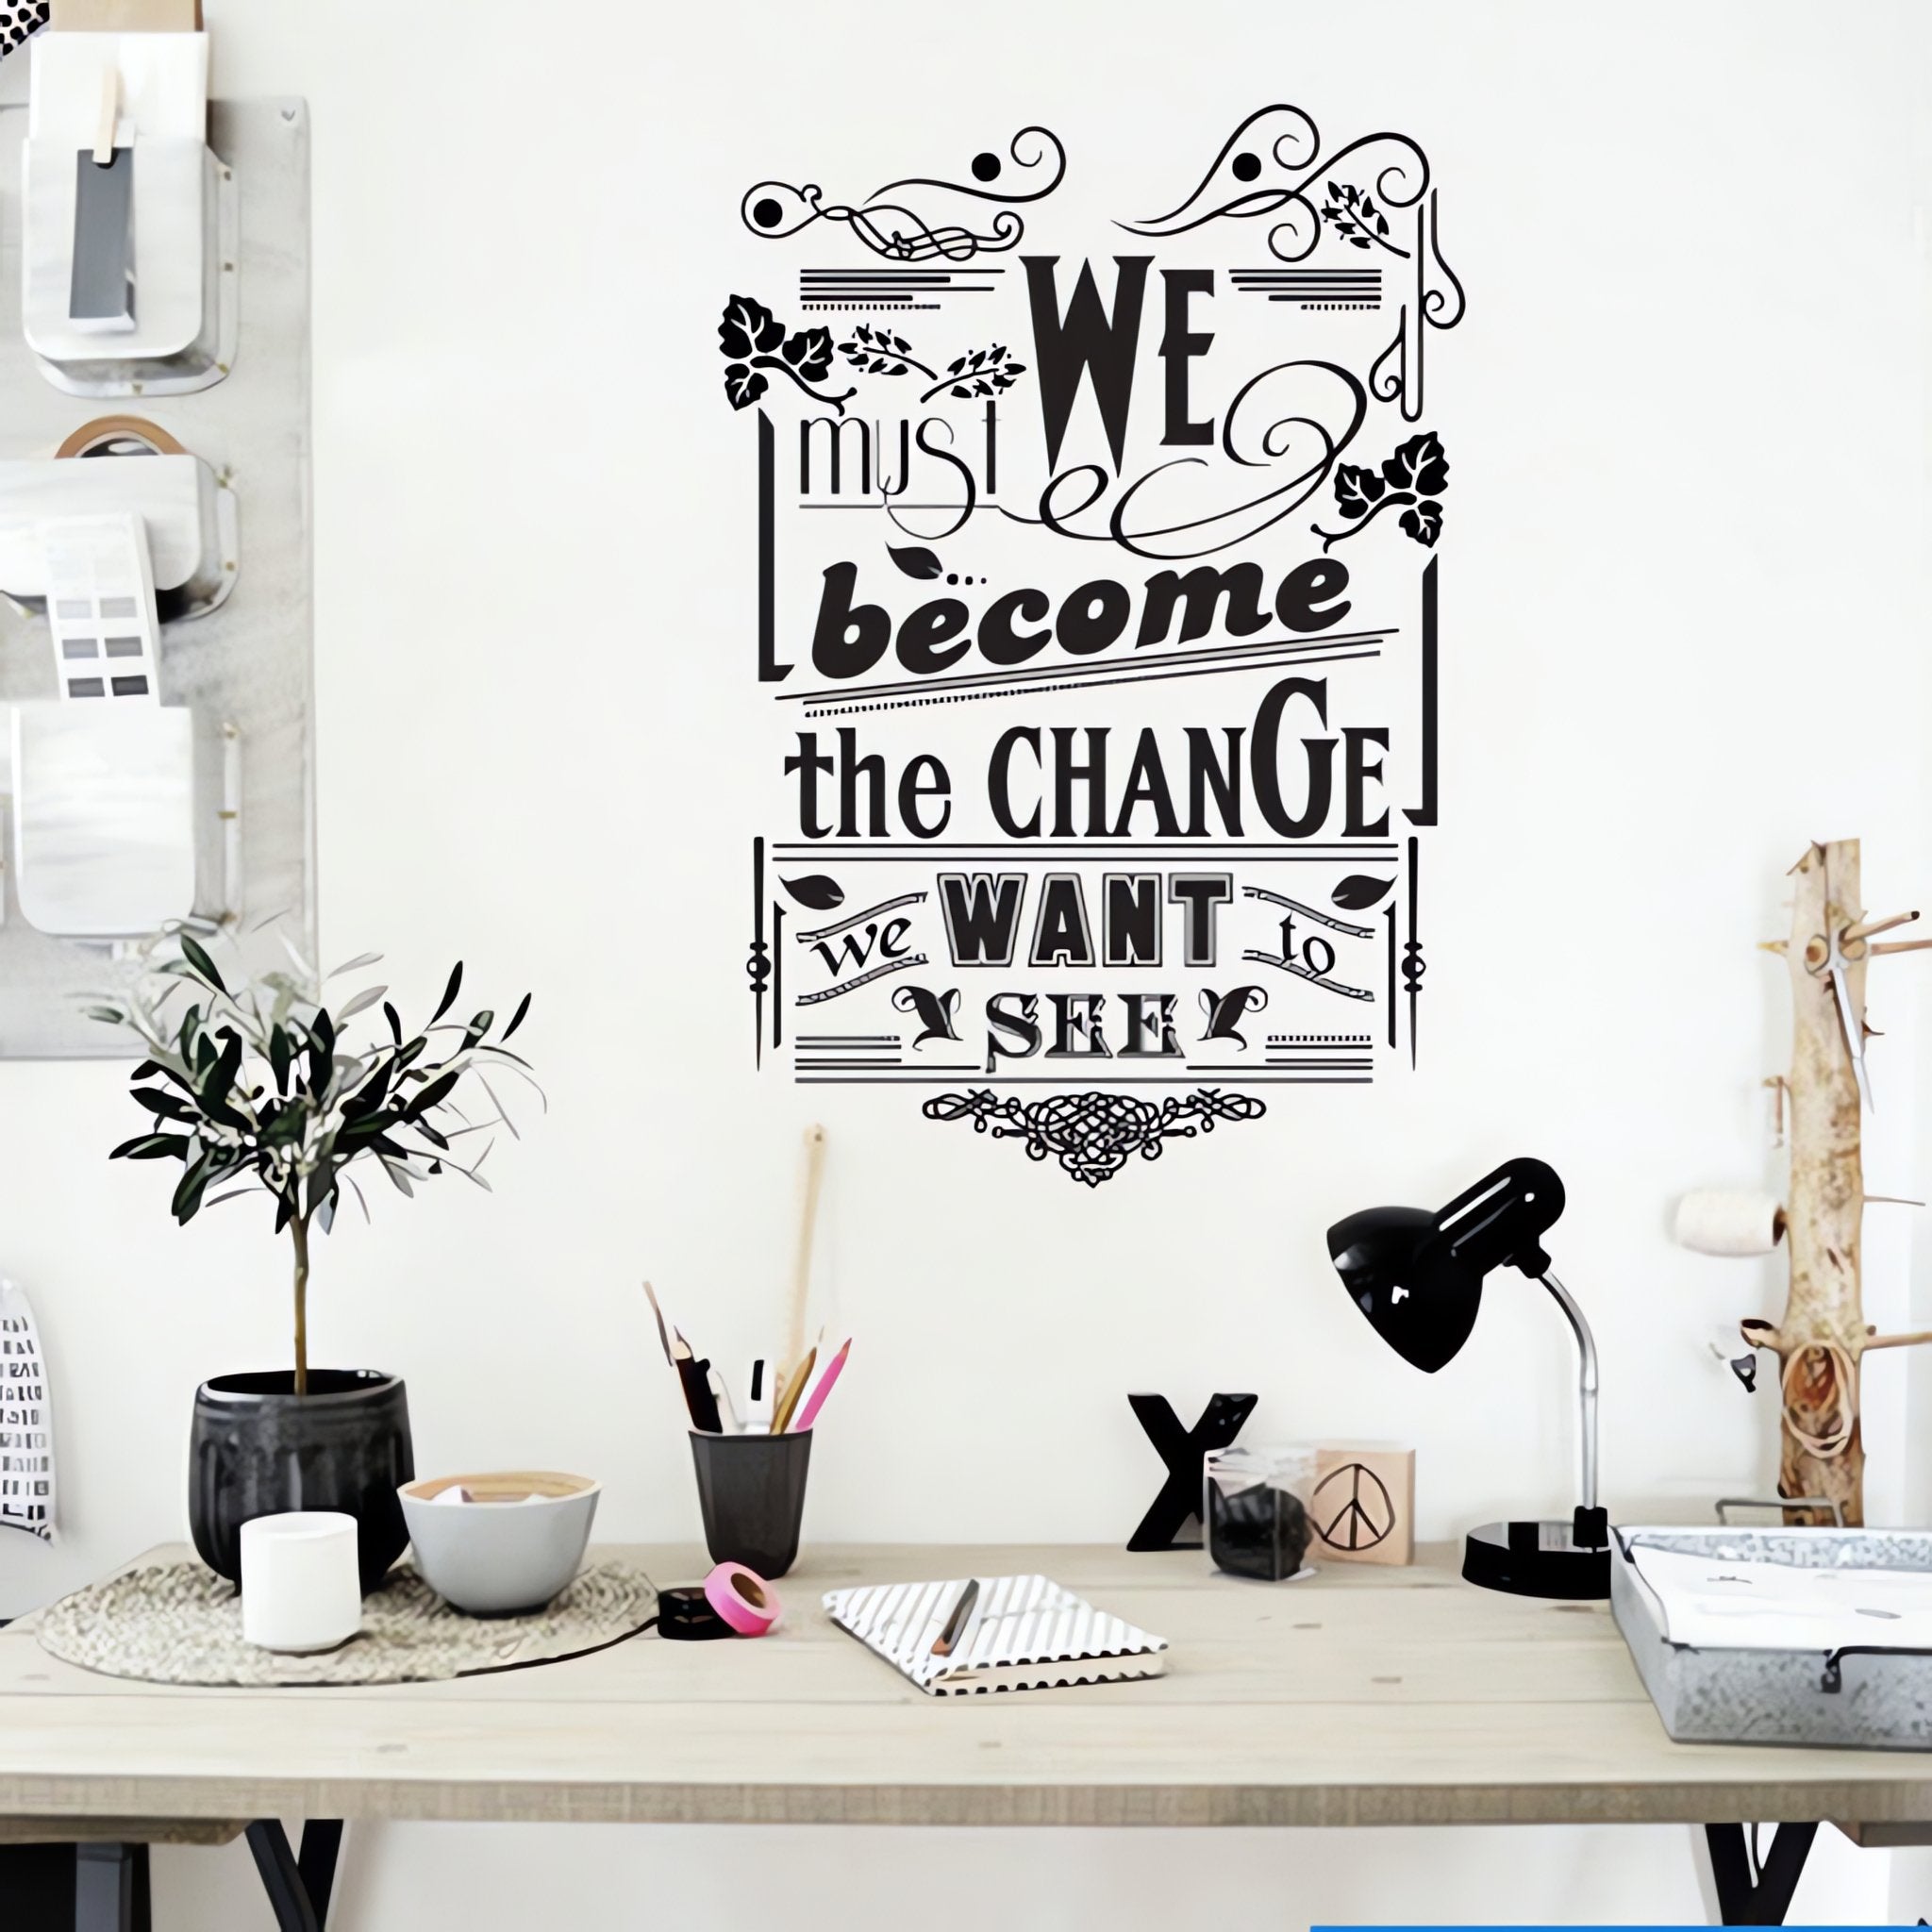 Wall quote sticker with text "We Must Become the Change We Want to See" in an office with a desk and office equipment.